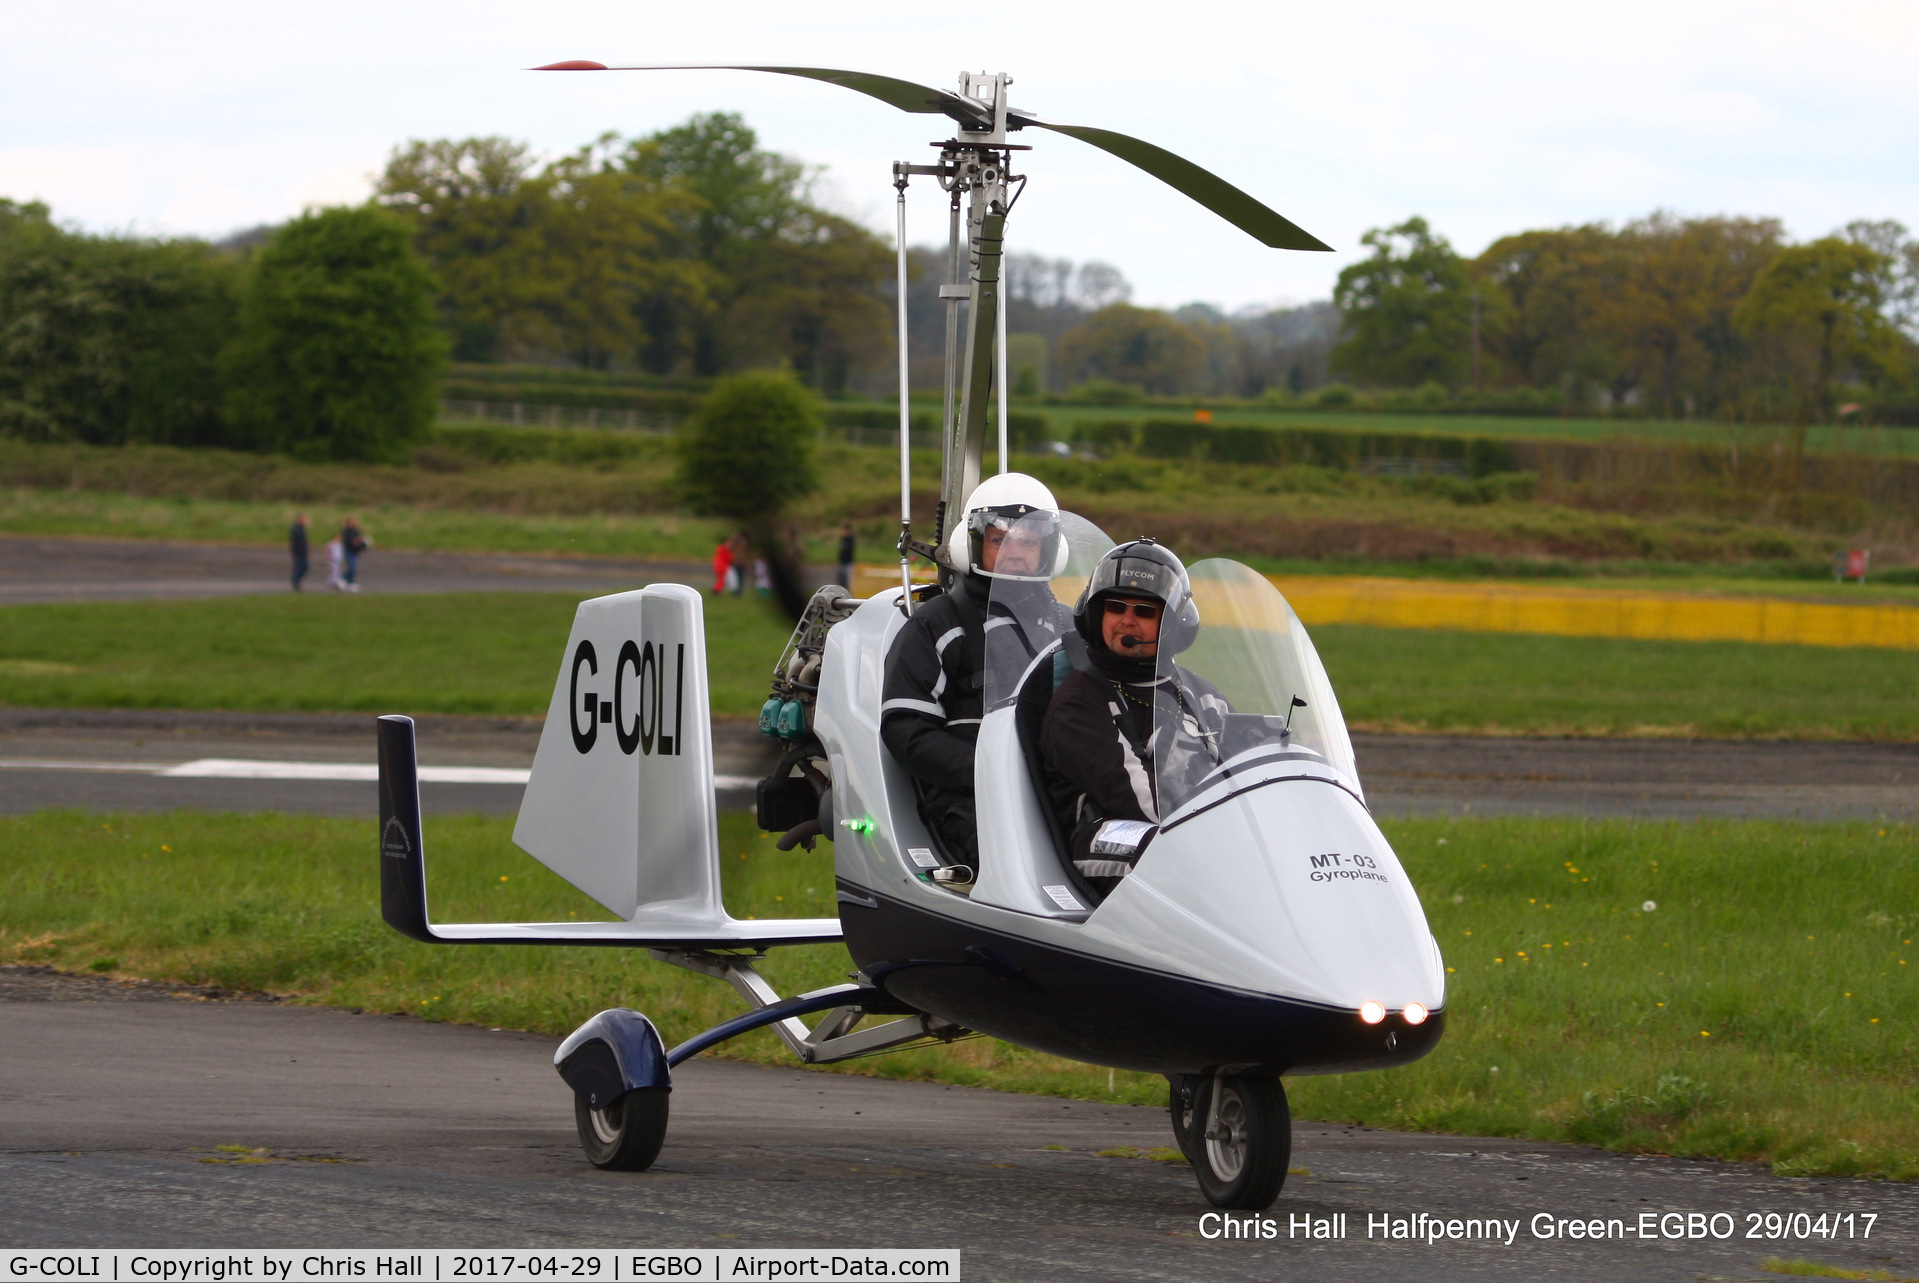 G-COLI, 2008 Rotorsport UK MT-03 C/N RSUK/MT-03/037, at the Radial & Trainer fly-in